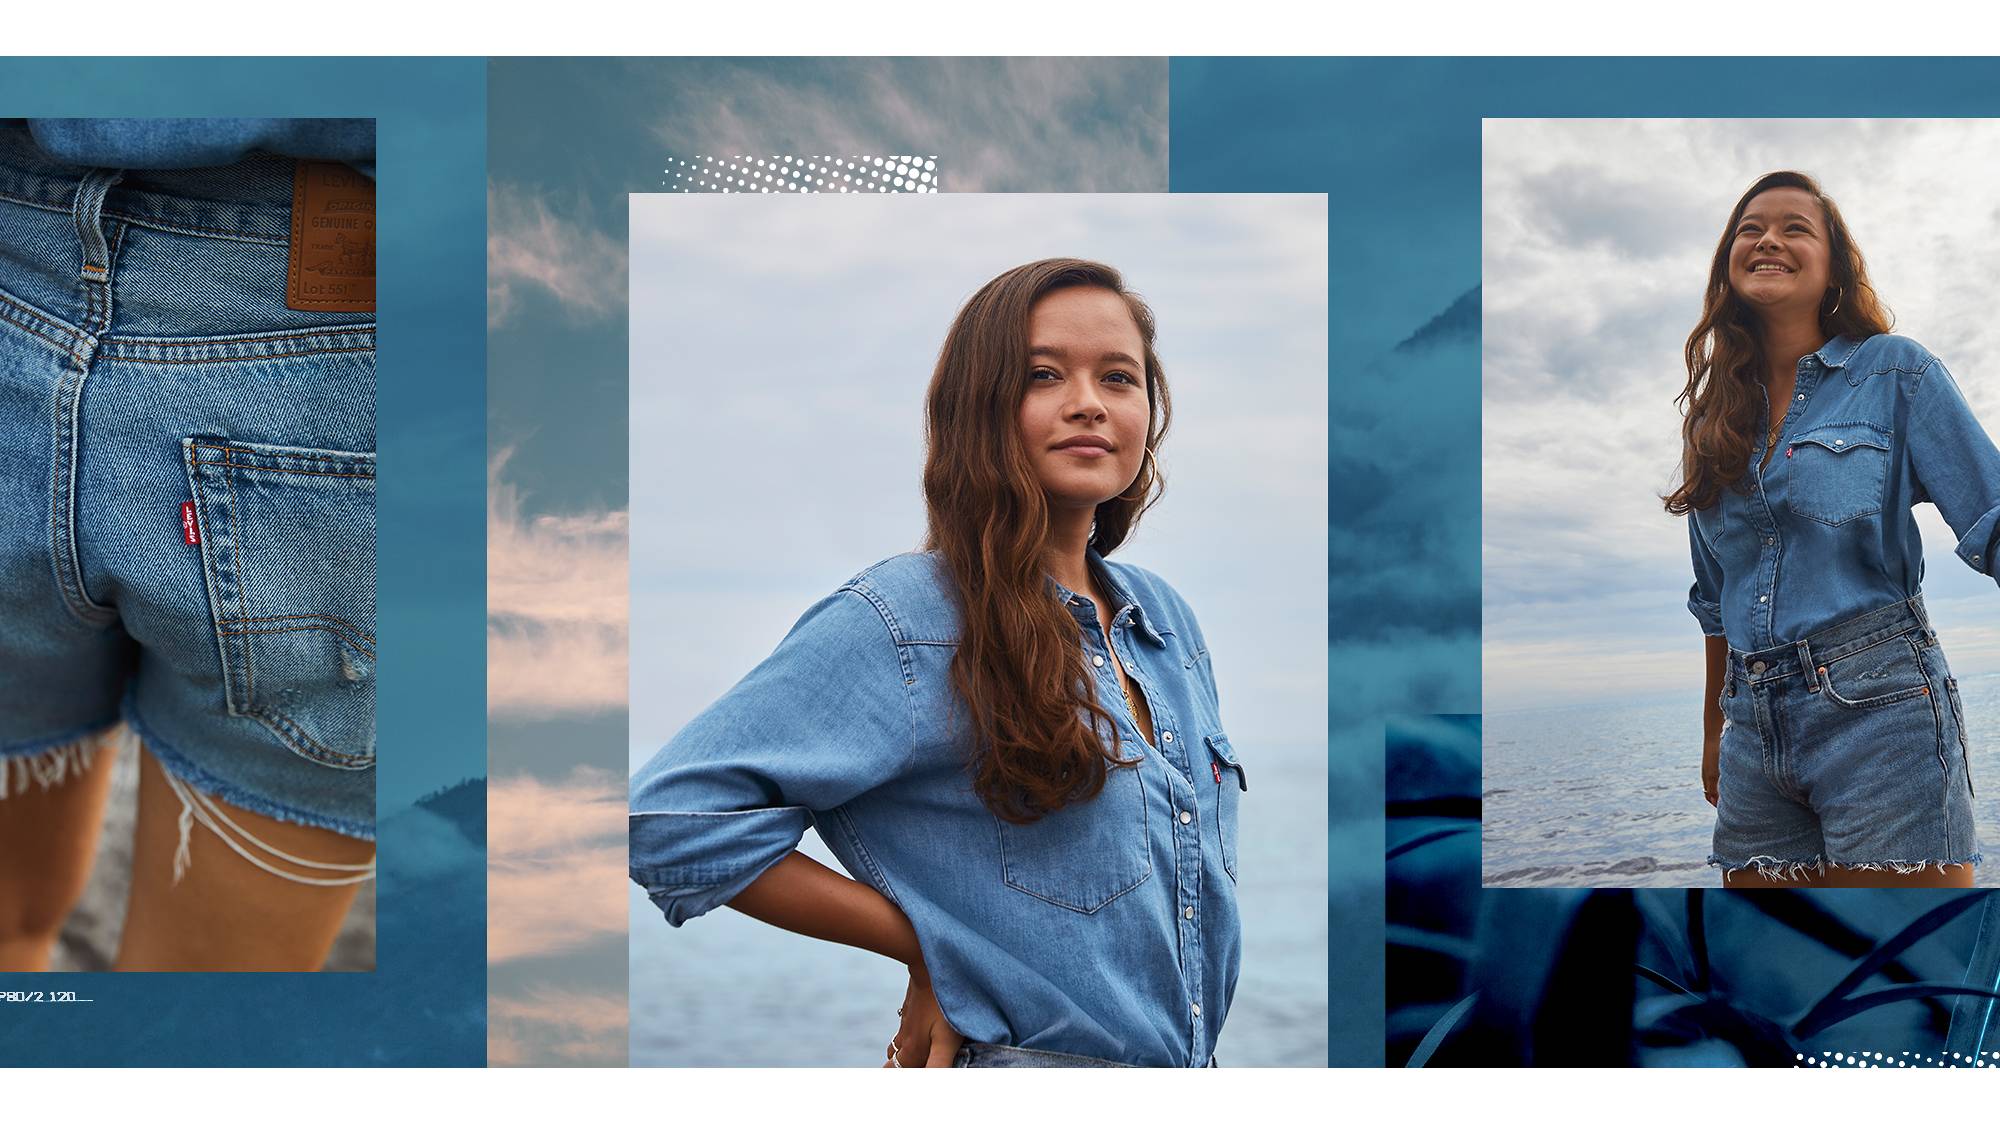 Three photos, the first shows the back pockets of Melati's Levi jean shorts, the second photo is a portrait shot of Melati in a Levi's button up standing with her hands on her hips, and the third photo shows Melati standing in front of the ocean laughing wearing Levi jean shorts and a Levi's button up shirt